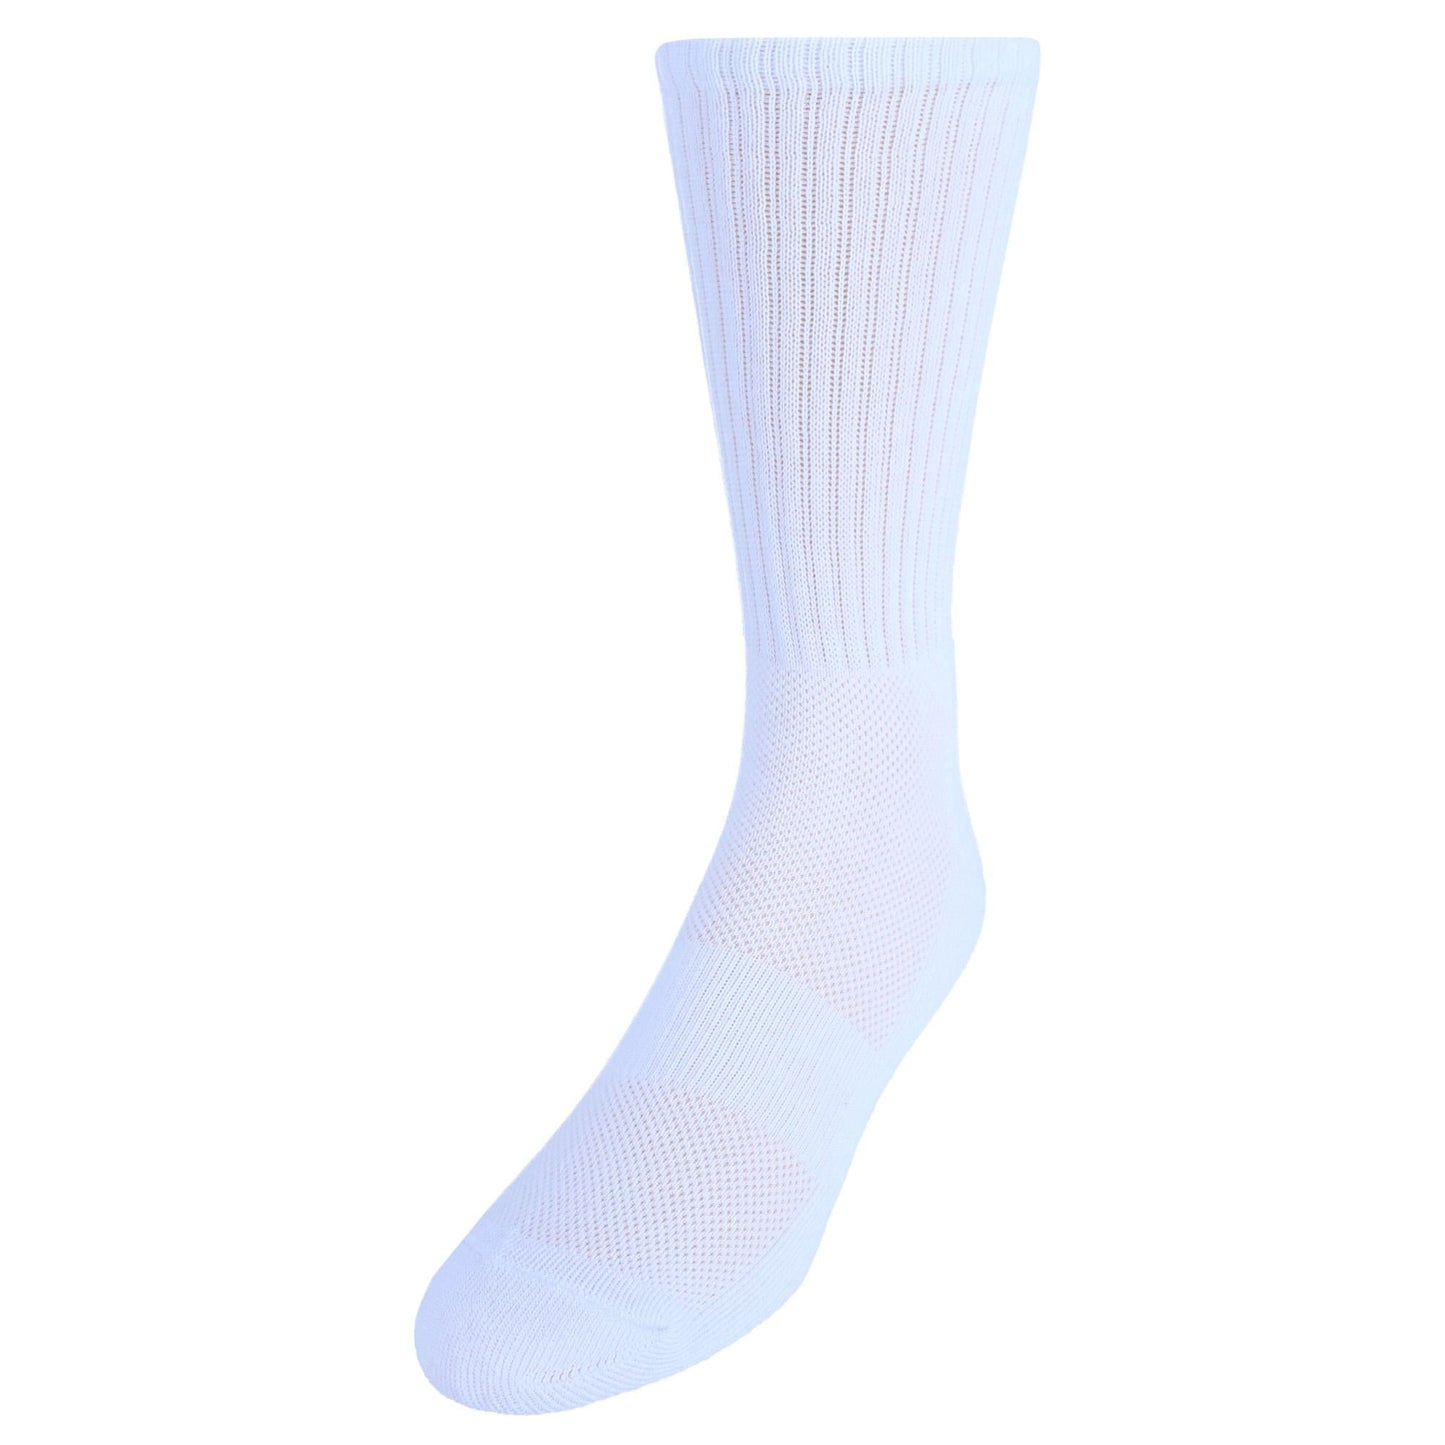 CTM® Men's Dry and Cool Cushioned Crew Socks (Pack of 2)